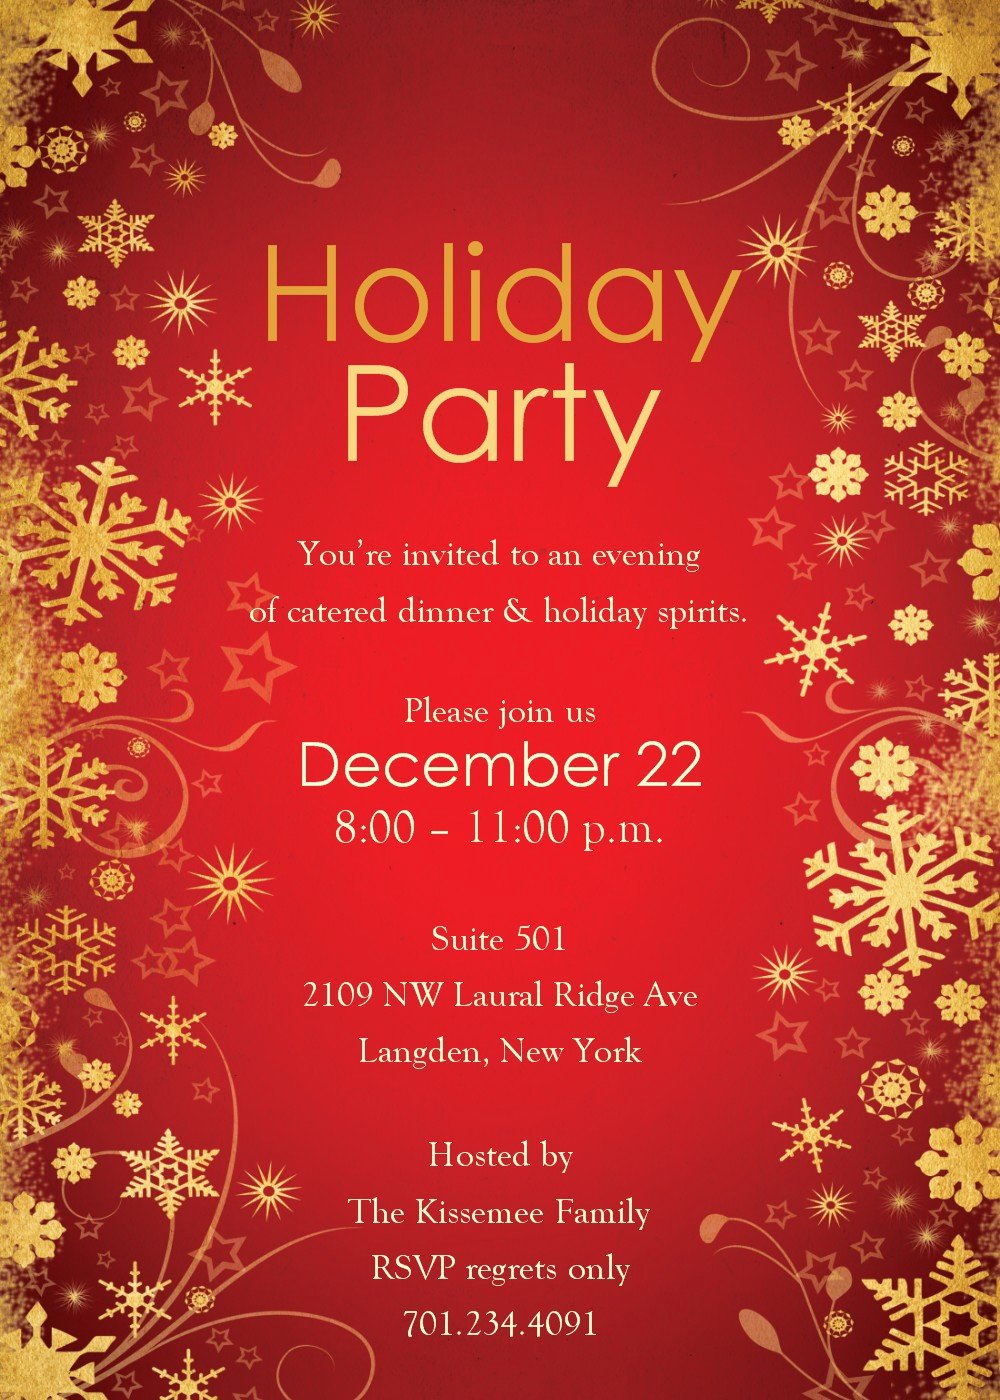 Holiday Party Invite Template New Free Holiday Party Invitation Templates